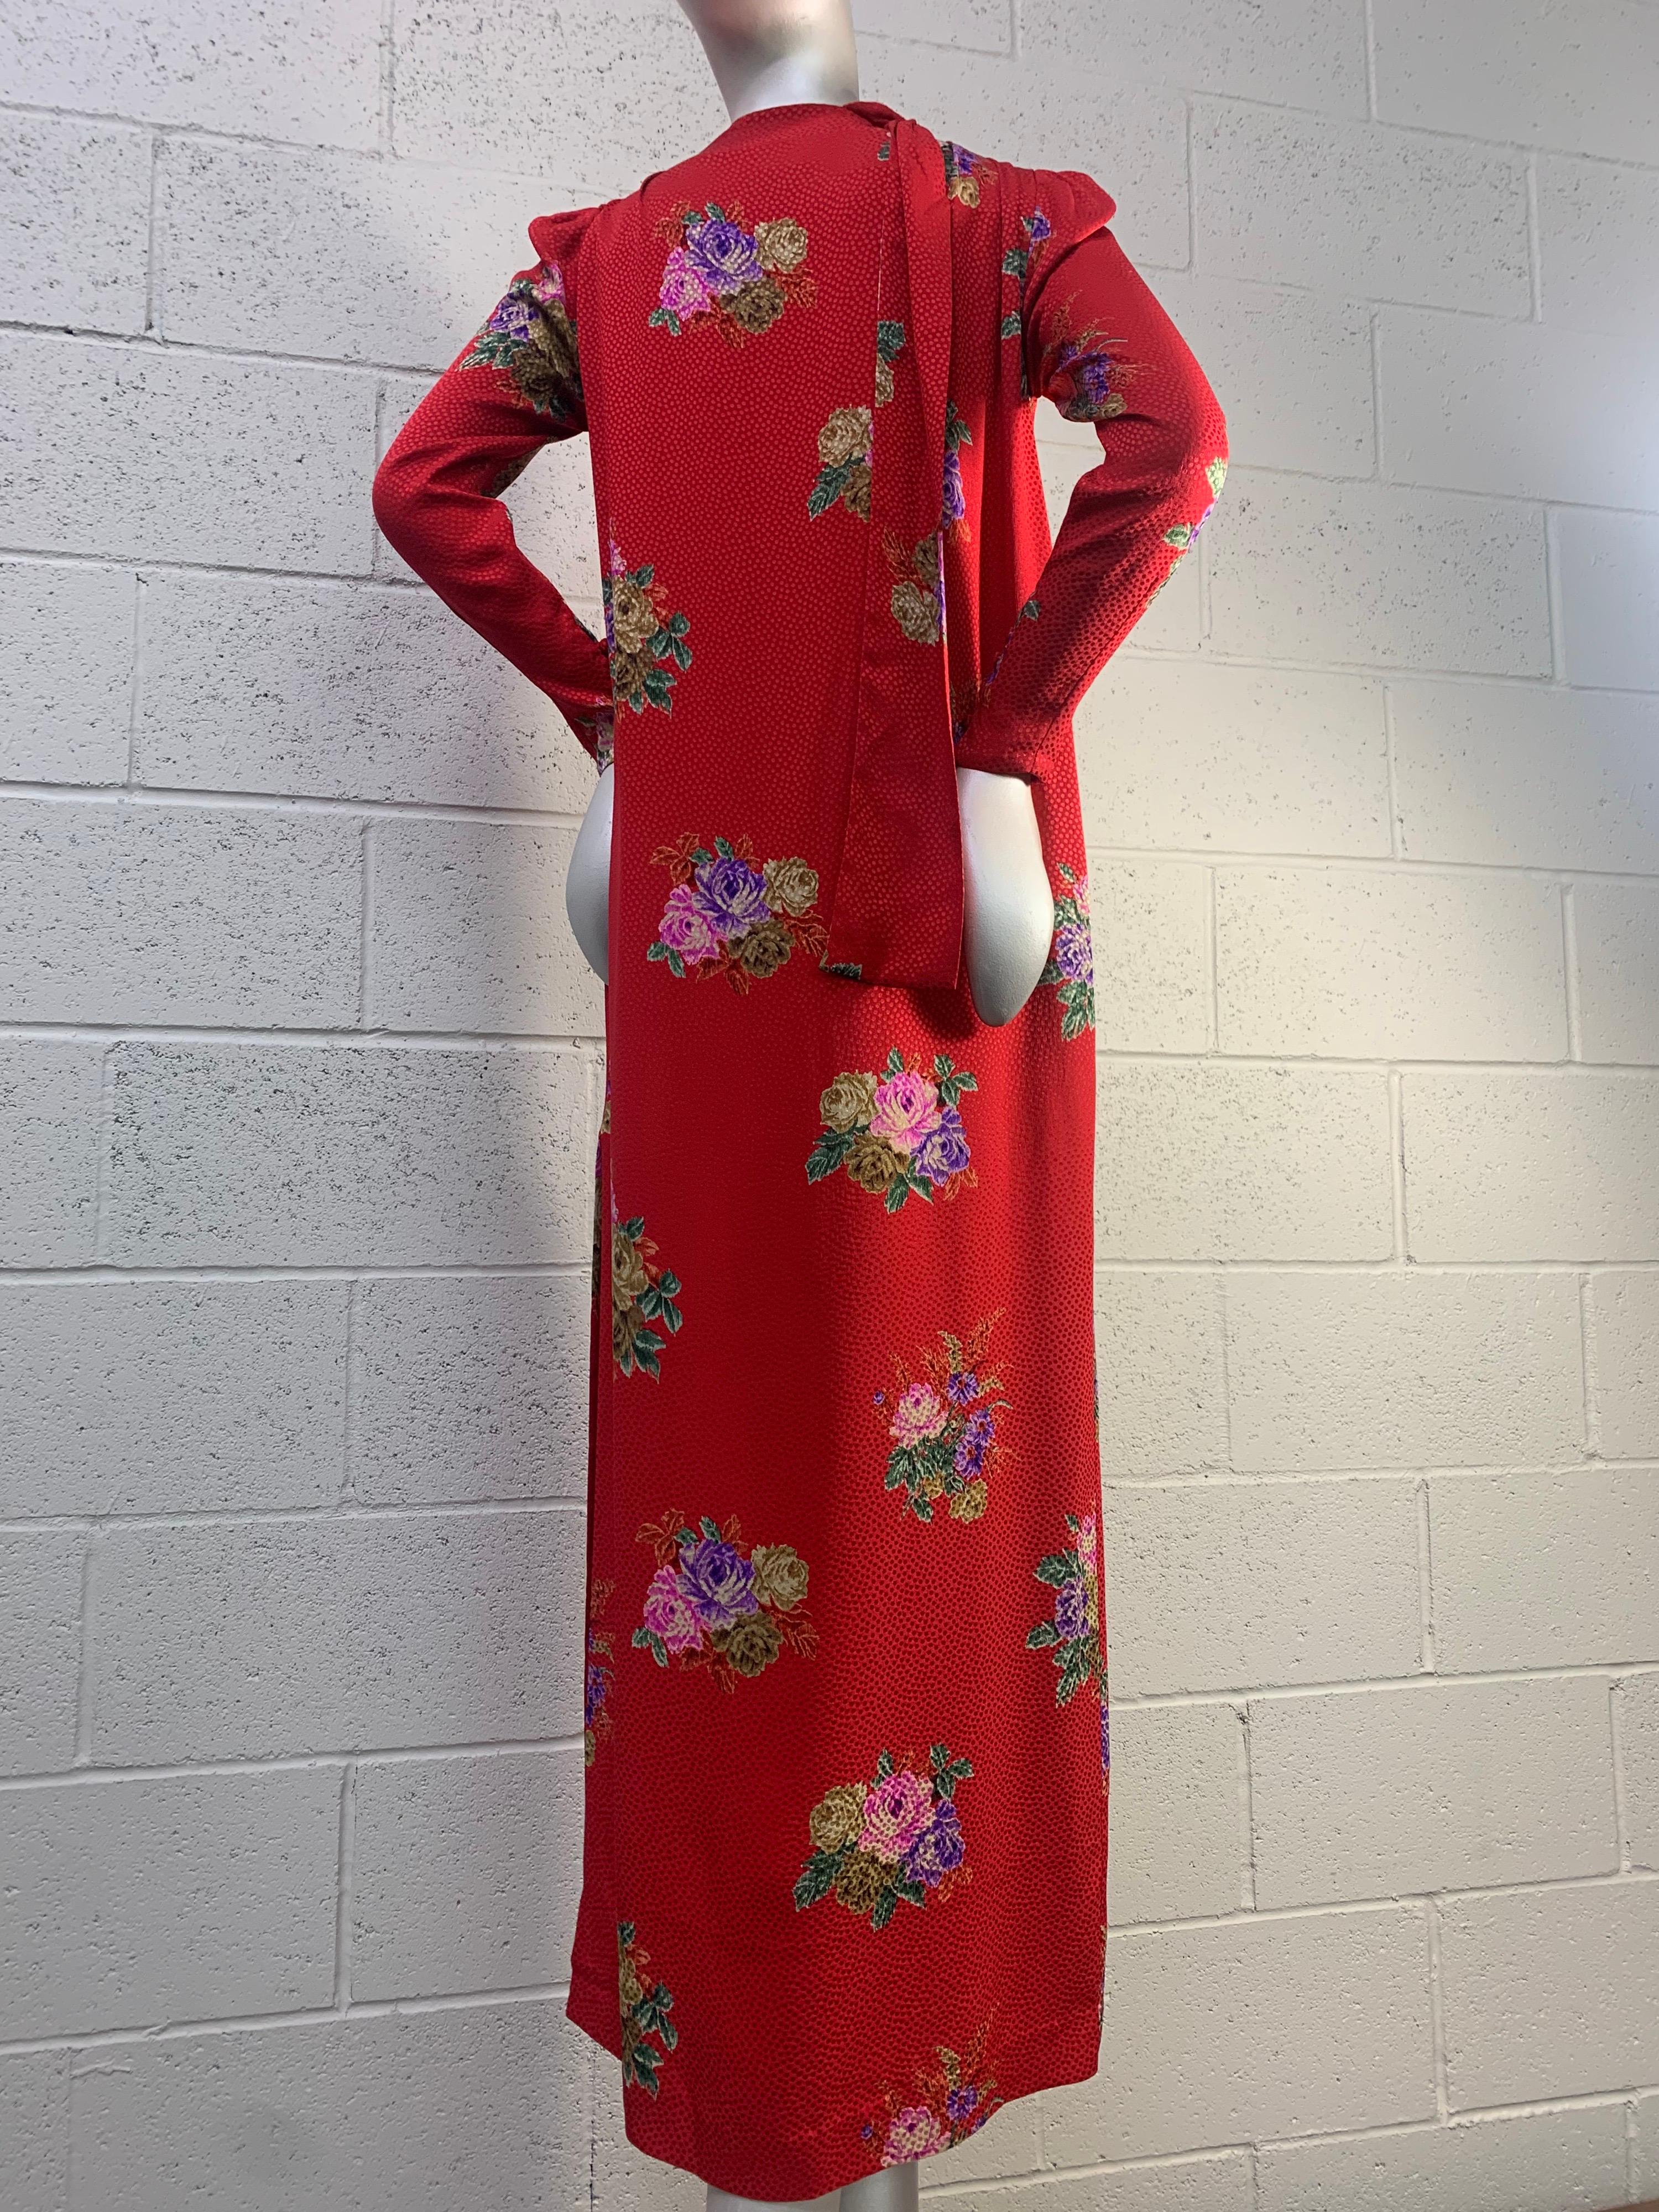 1980s Andrea Odicini Red & Floral Silk Jacquard Print Long Sleeved Gown w/ Scarf 5